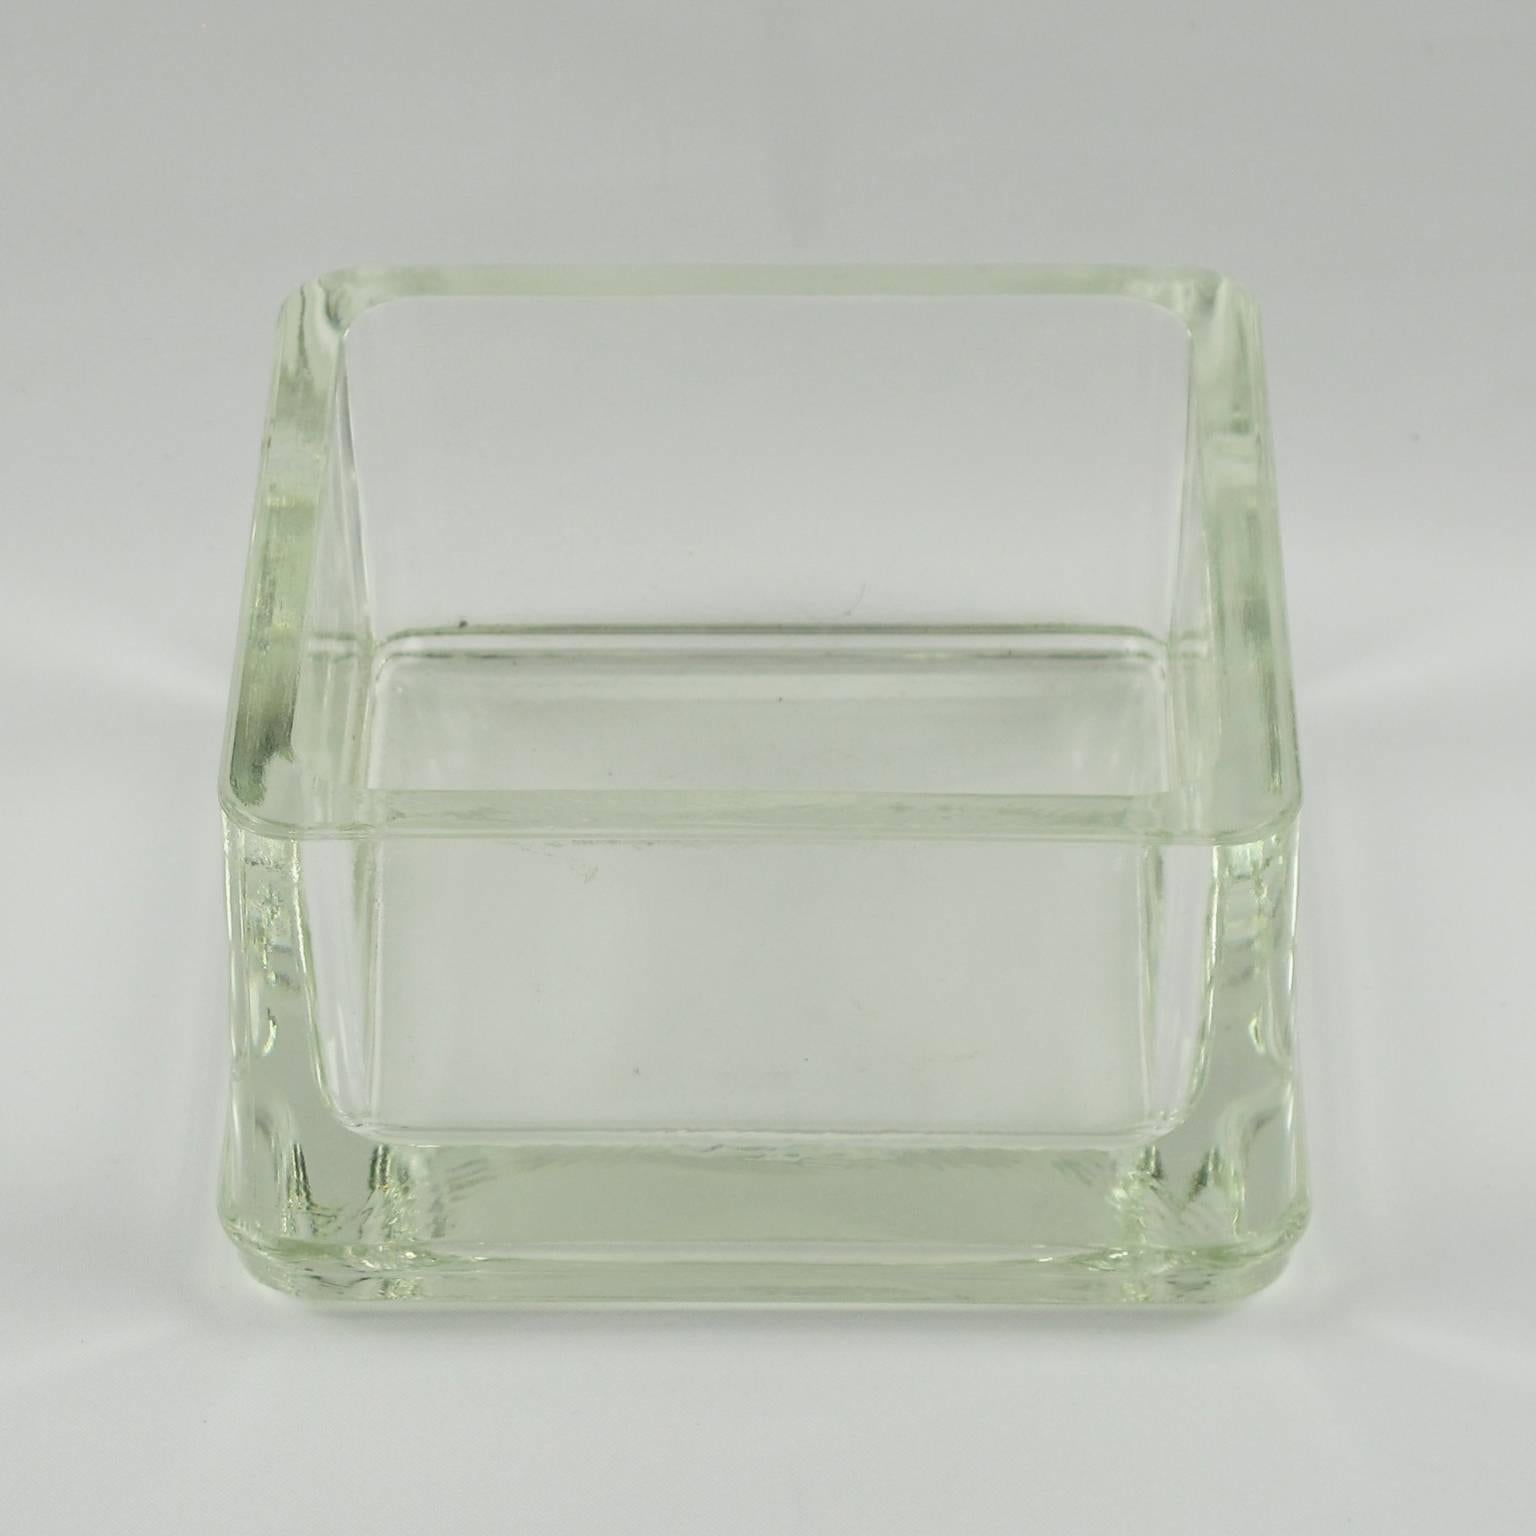 Industrial thick molded glass desktop accessory (desk tidy - ashtray) manufactured by Lumax, France. Original design by Le Corbusier, circa 1950s. Engraved company logo on side. Excellent vintage condition.

Measurements: 5.5 in. wide (14 cm) x